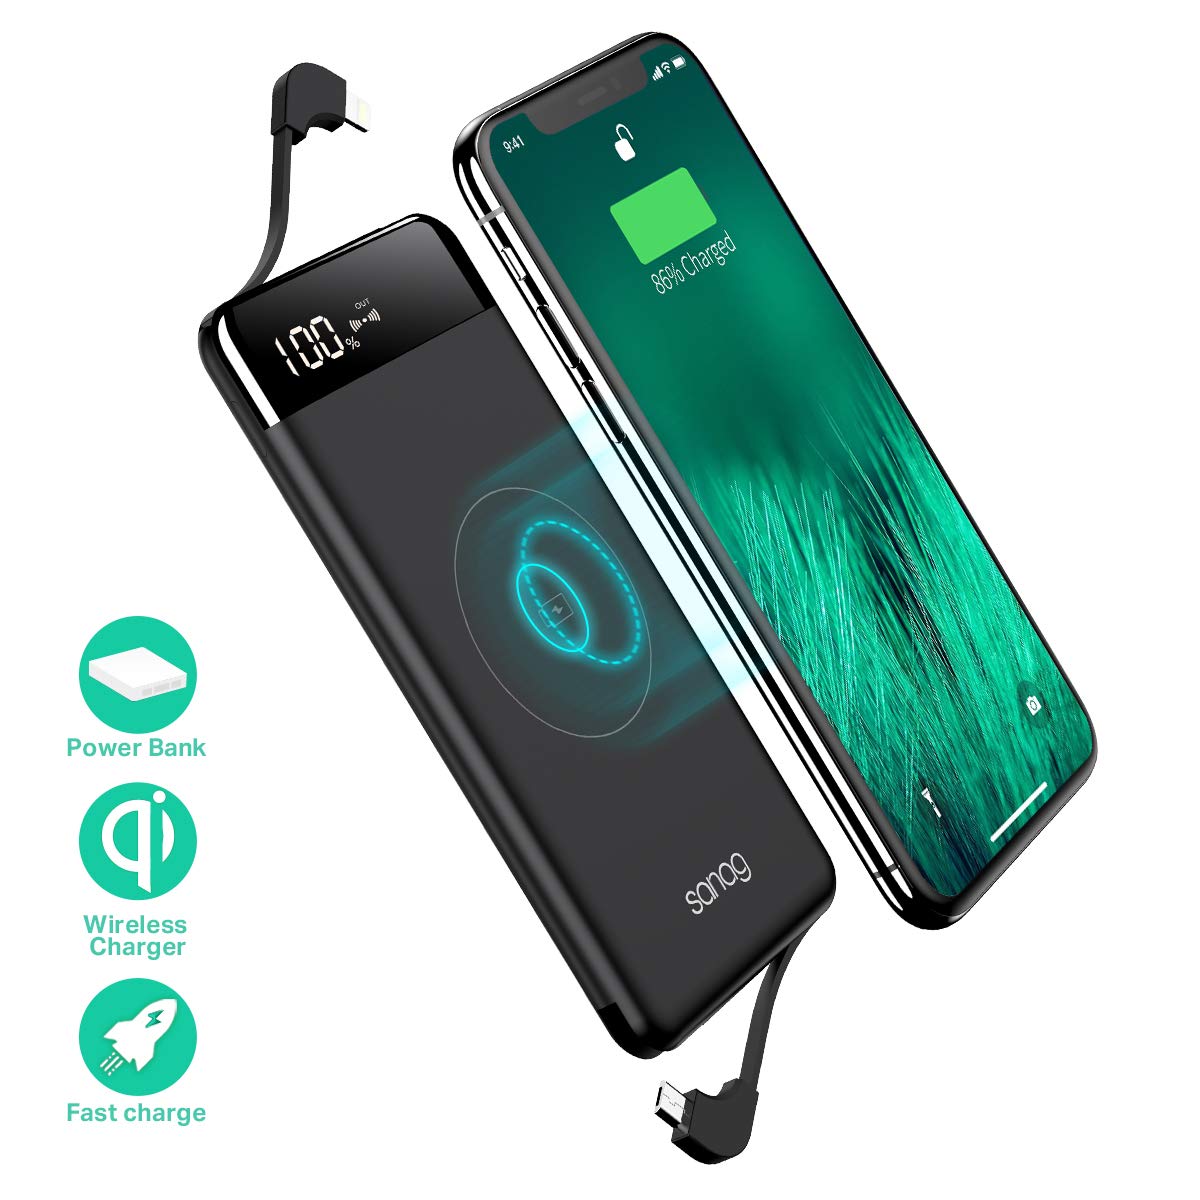 Wireless Portable Charger, Portable Charger, SANAG 10000mAh External Battery Pack